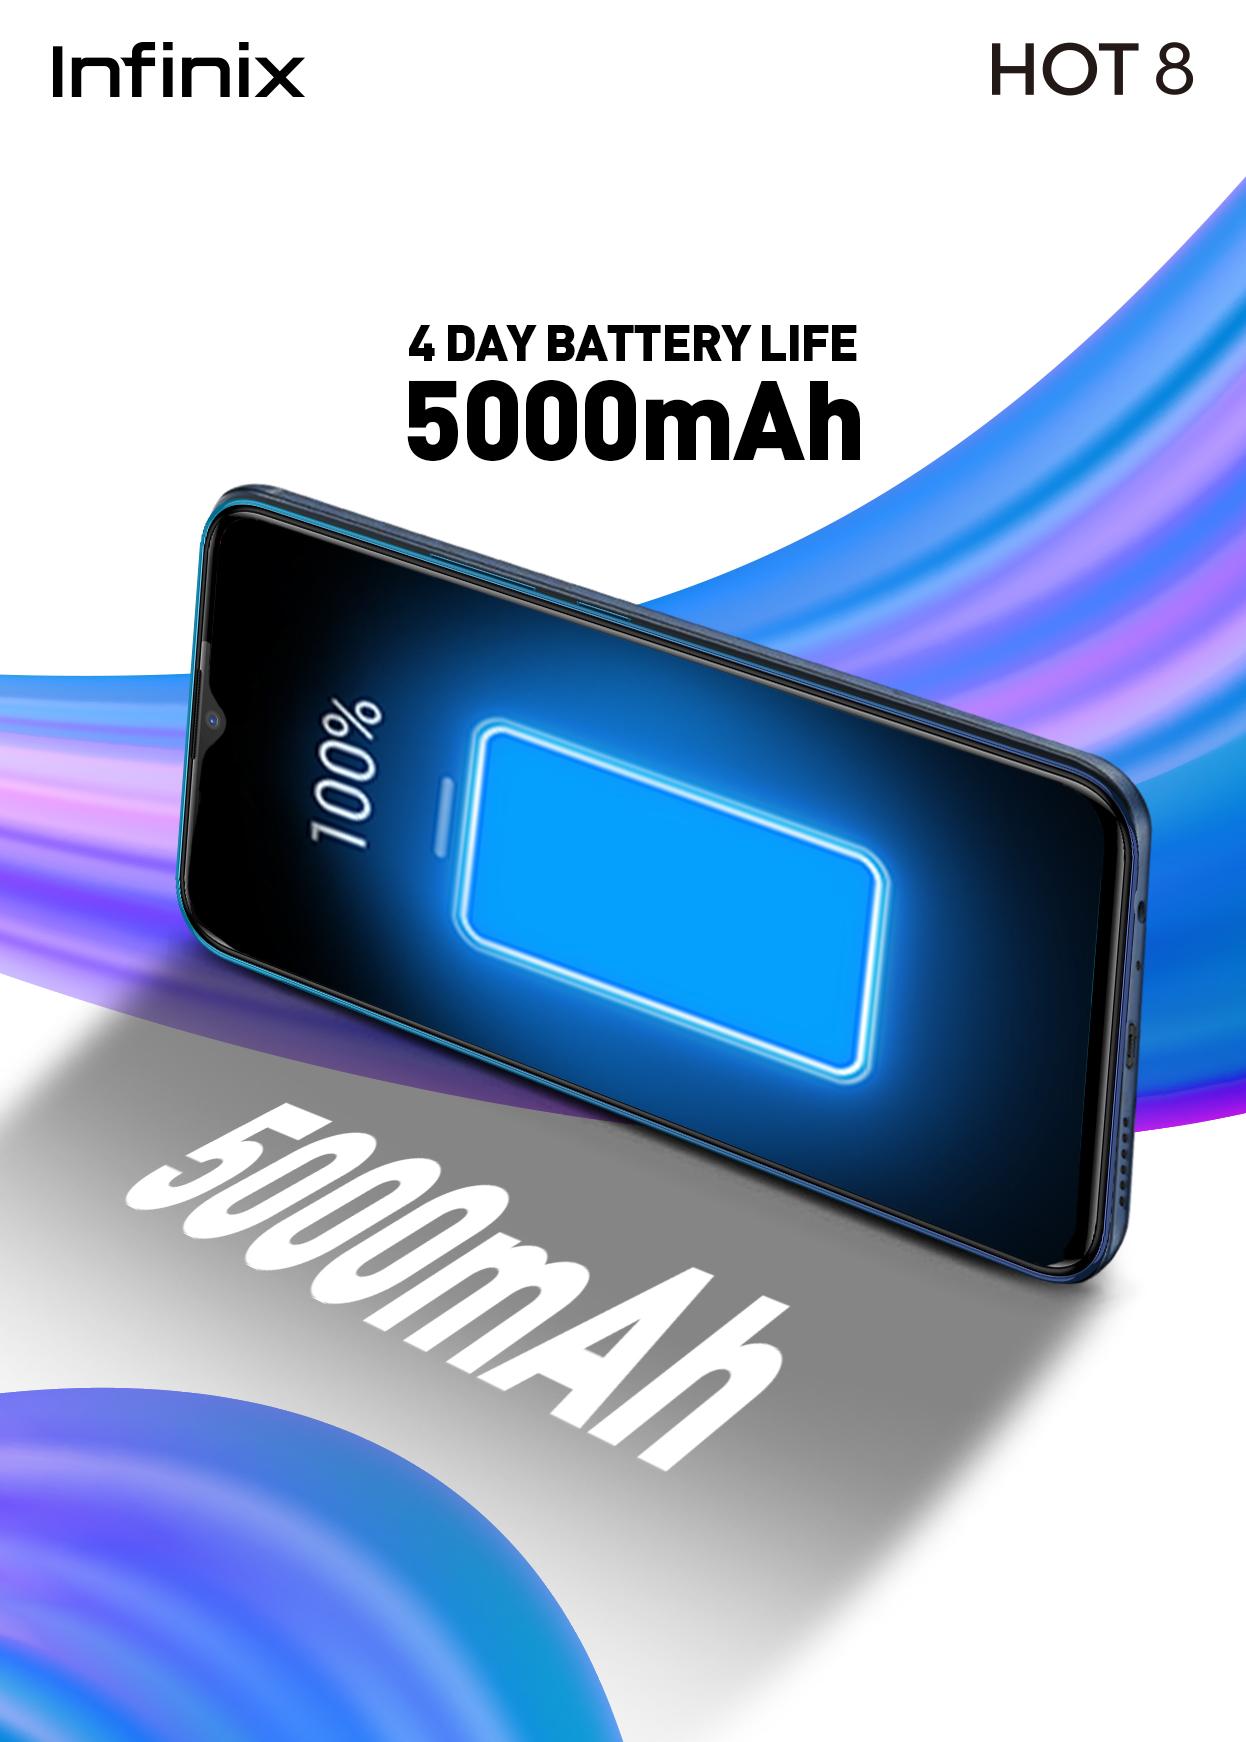 Now say goodbye to all your charging woes with Infinix Hot 8 Big Battery of 5000mAh